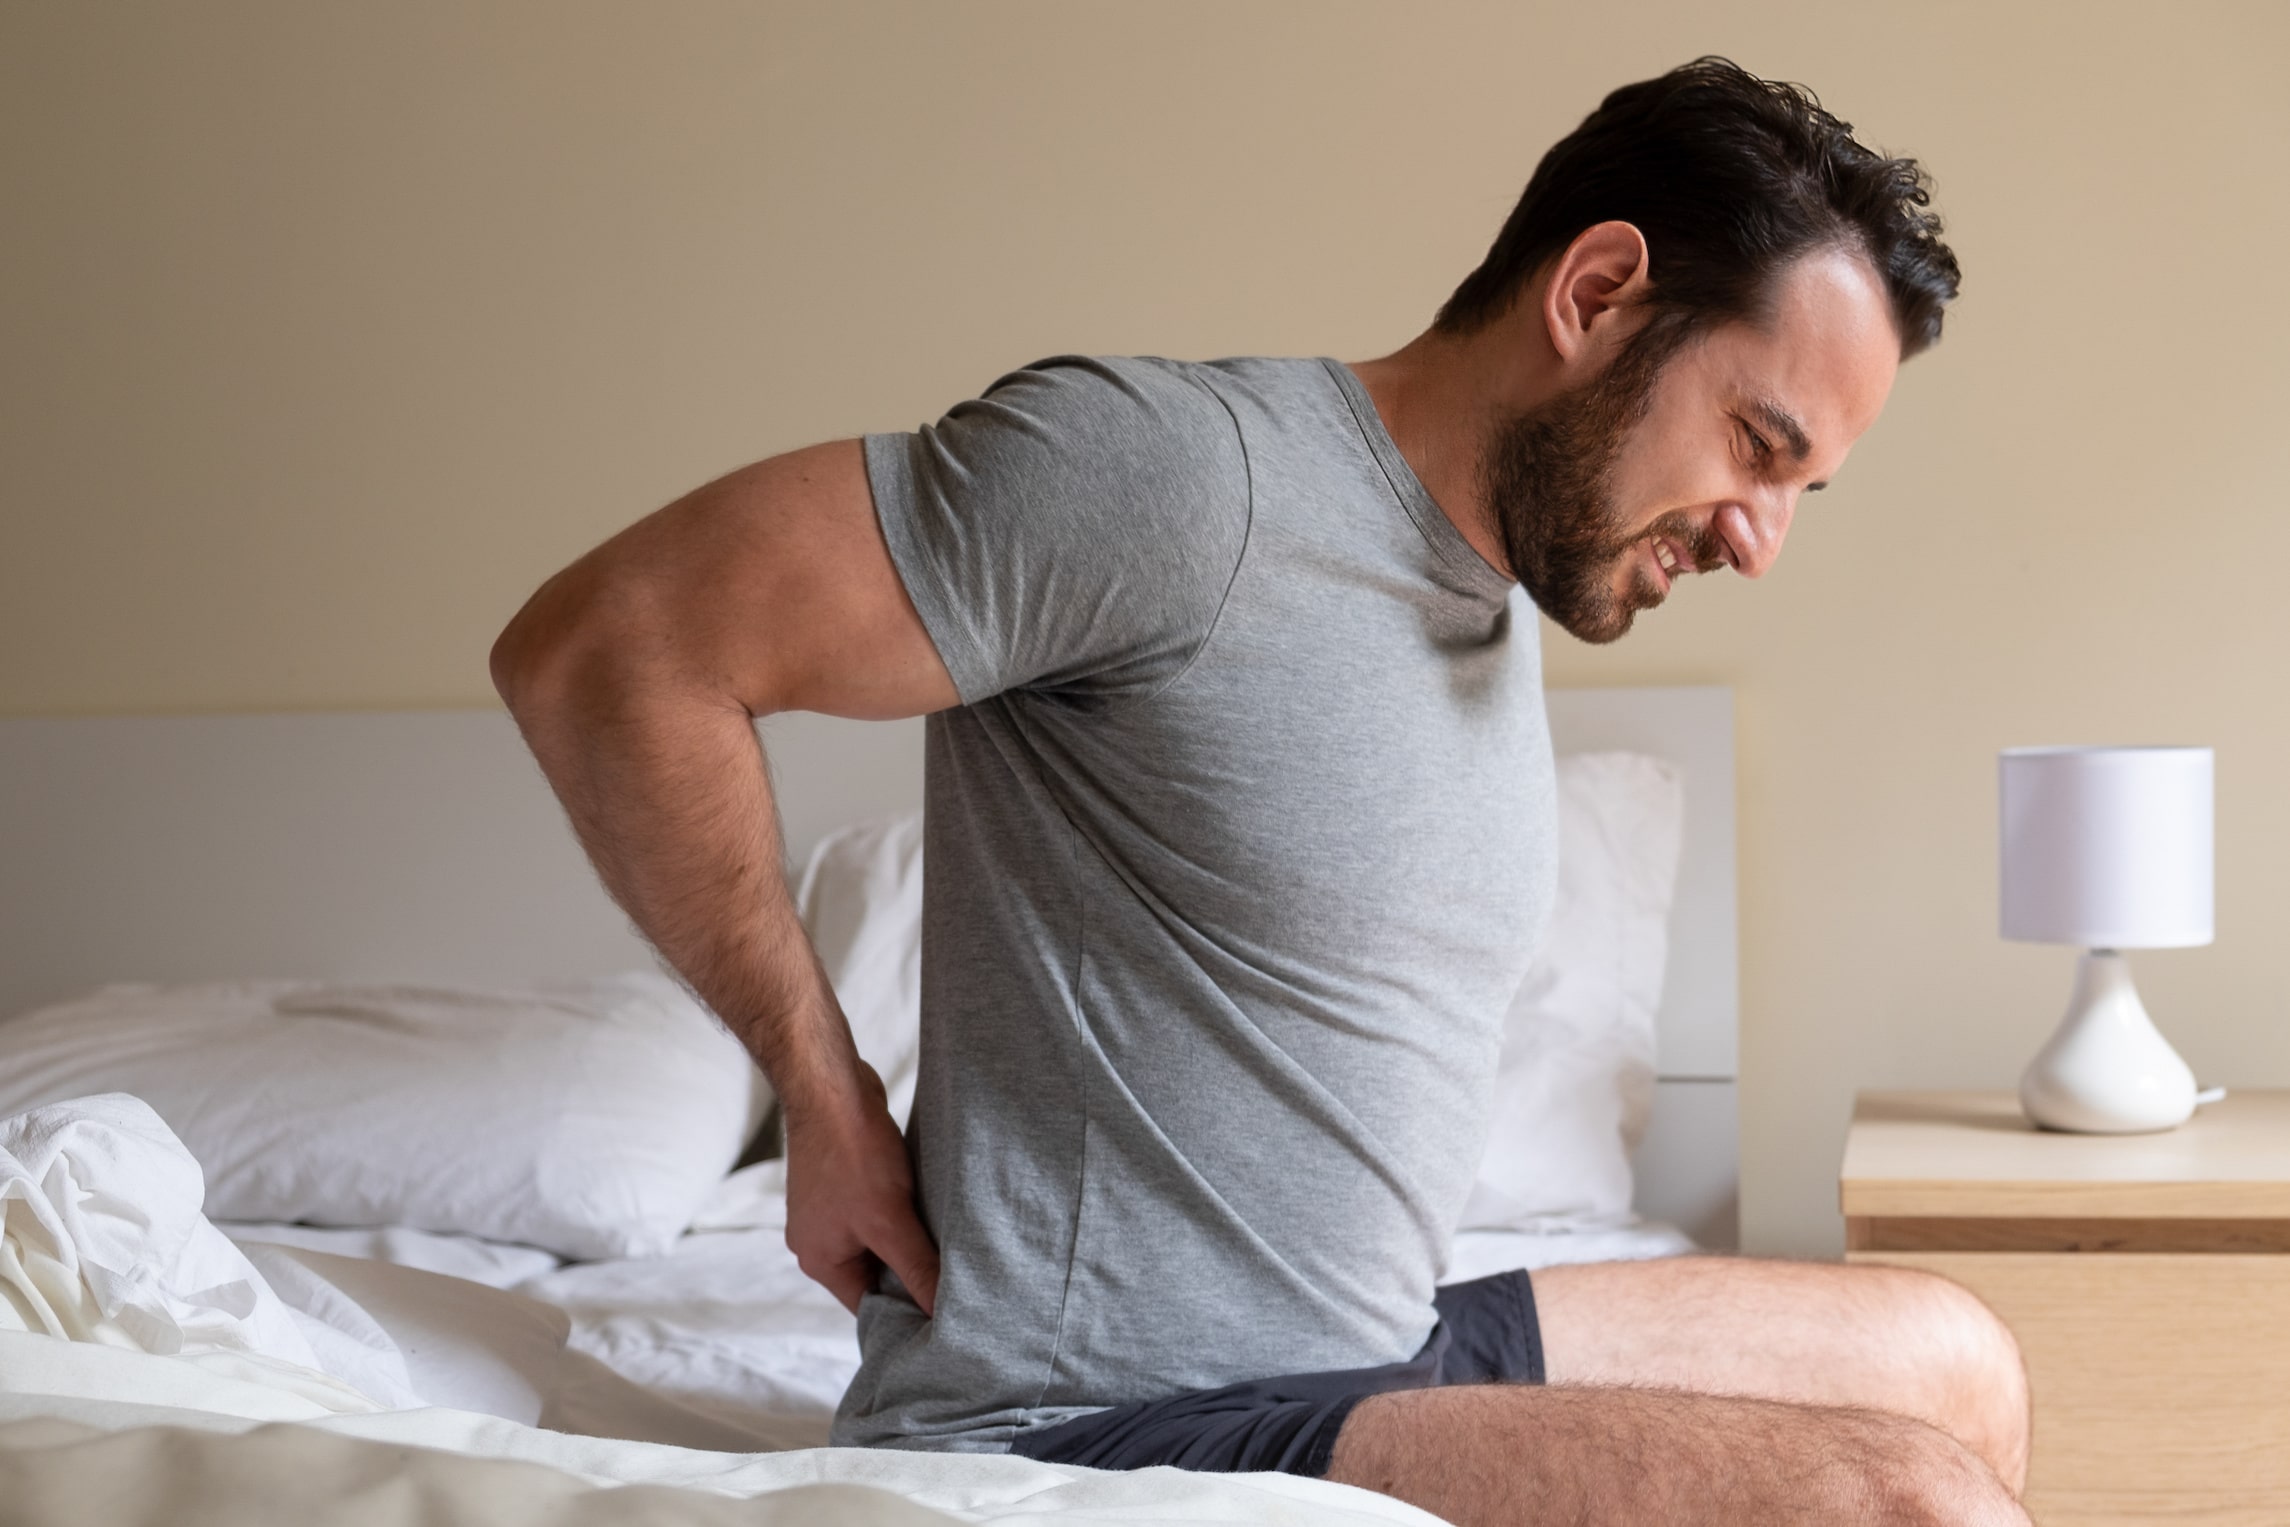 Sciatica-Back-Pain-Physical-Therapy-Southern-Rehab-and-Sports-Medicine